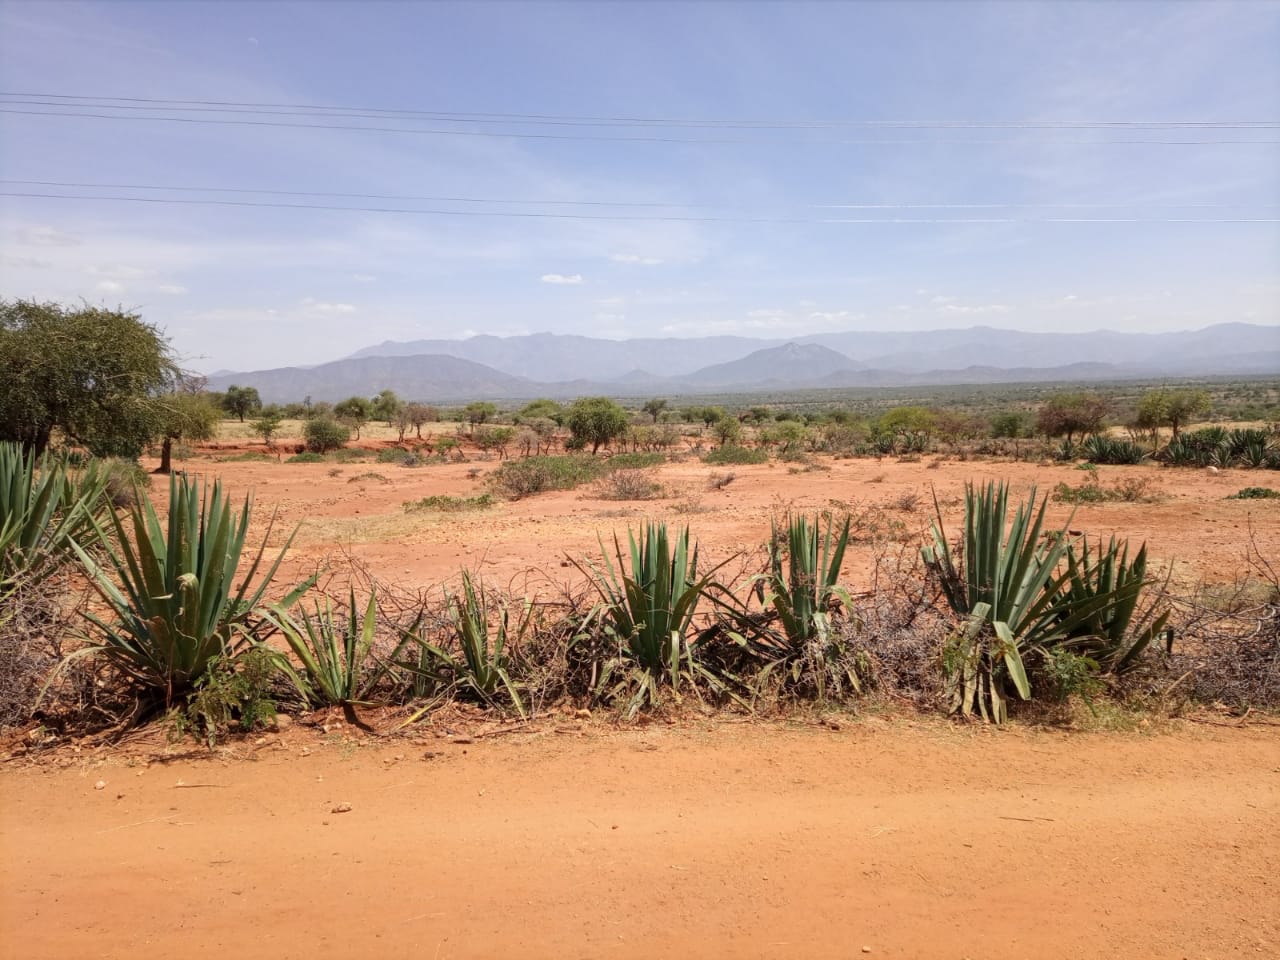 Dry landscape without grass, with scattered trees and sisal fences.